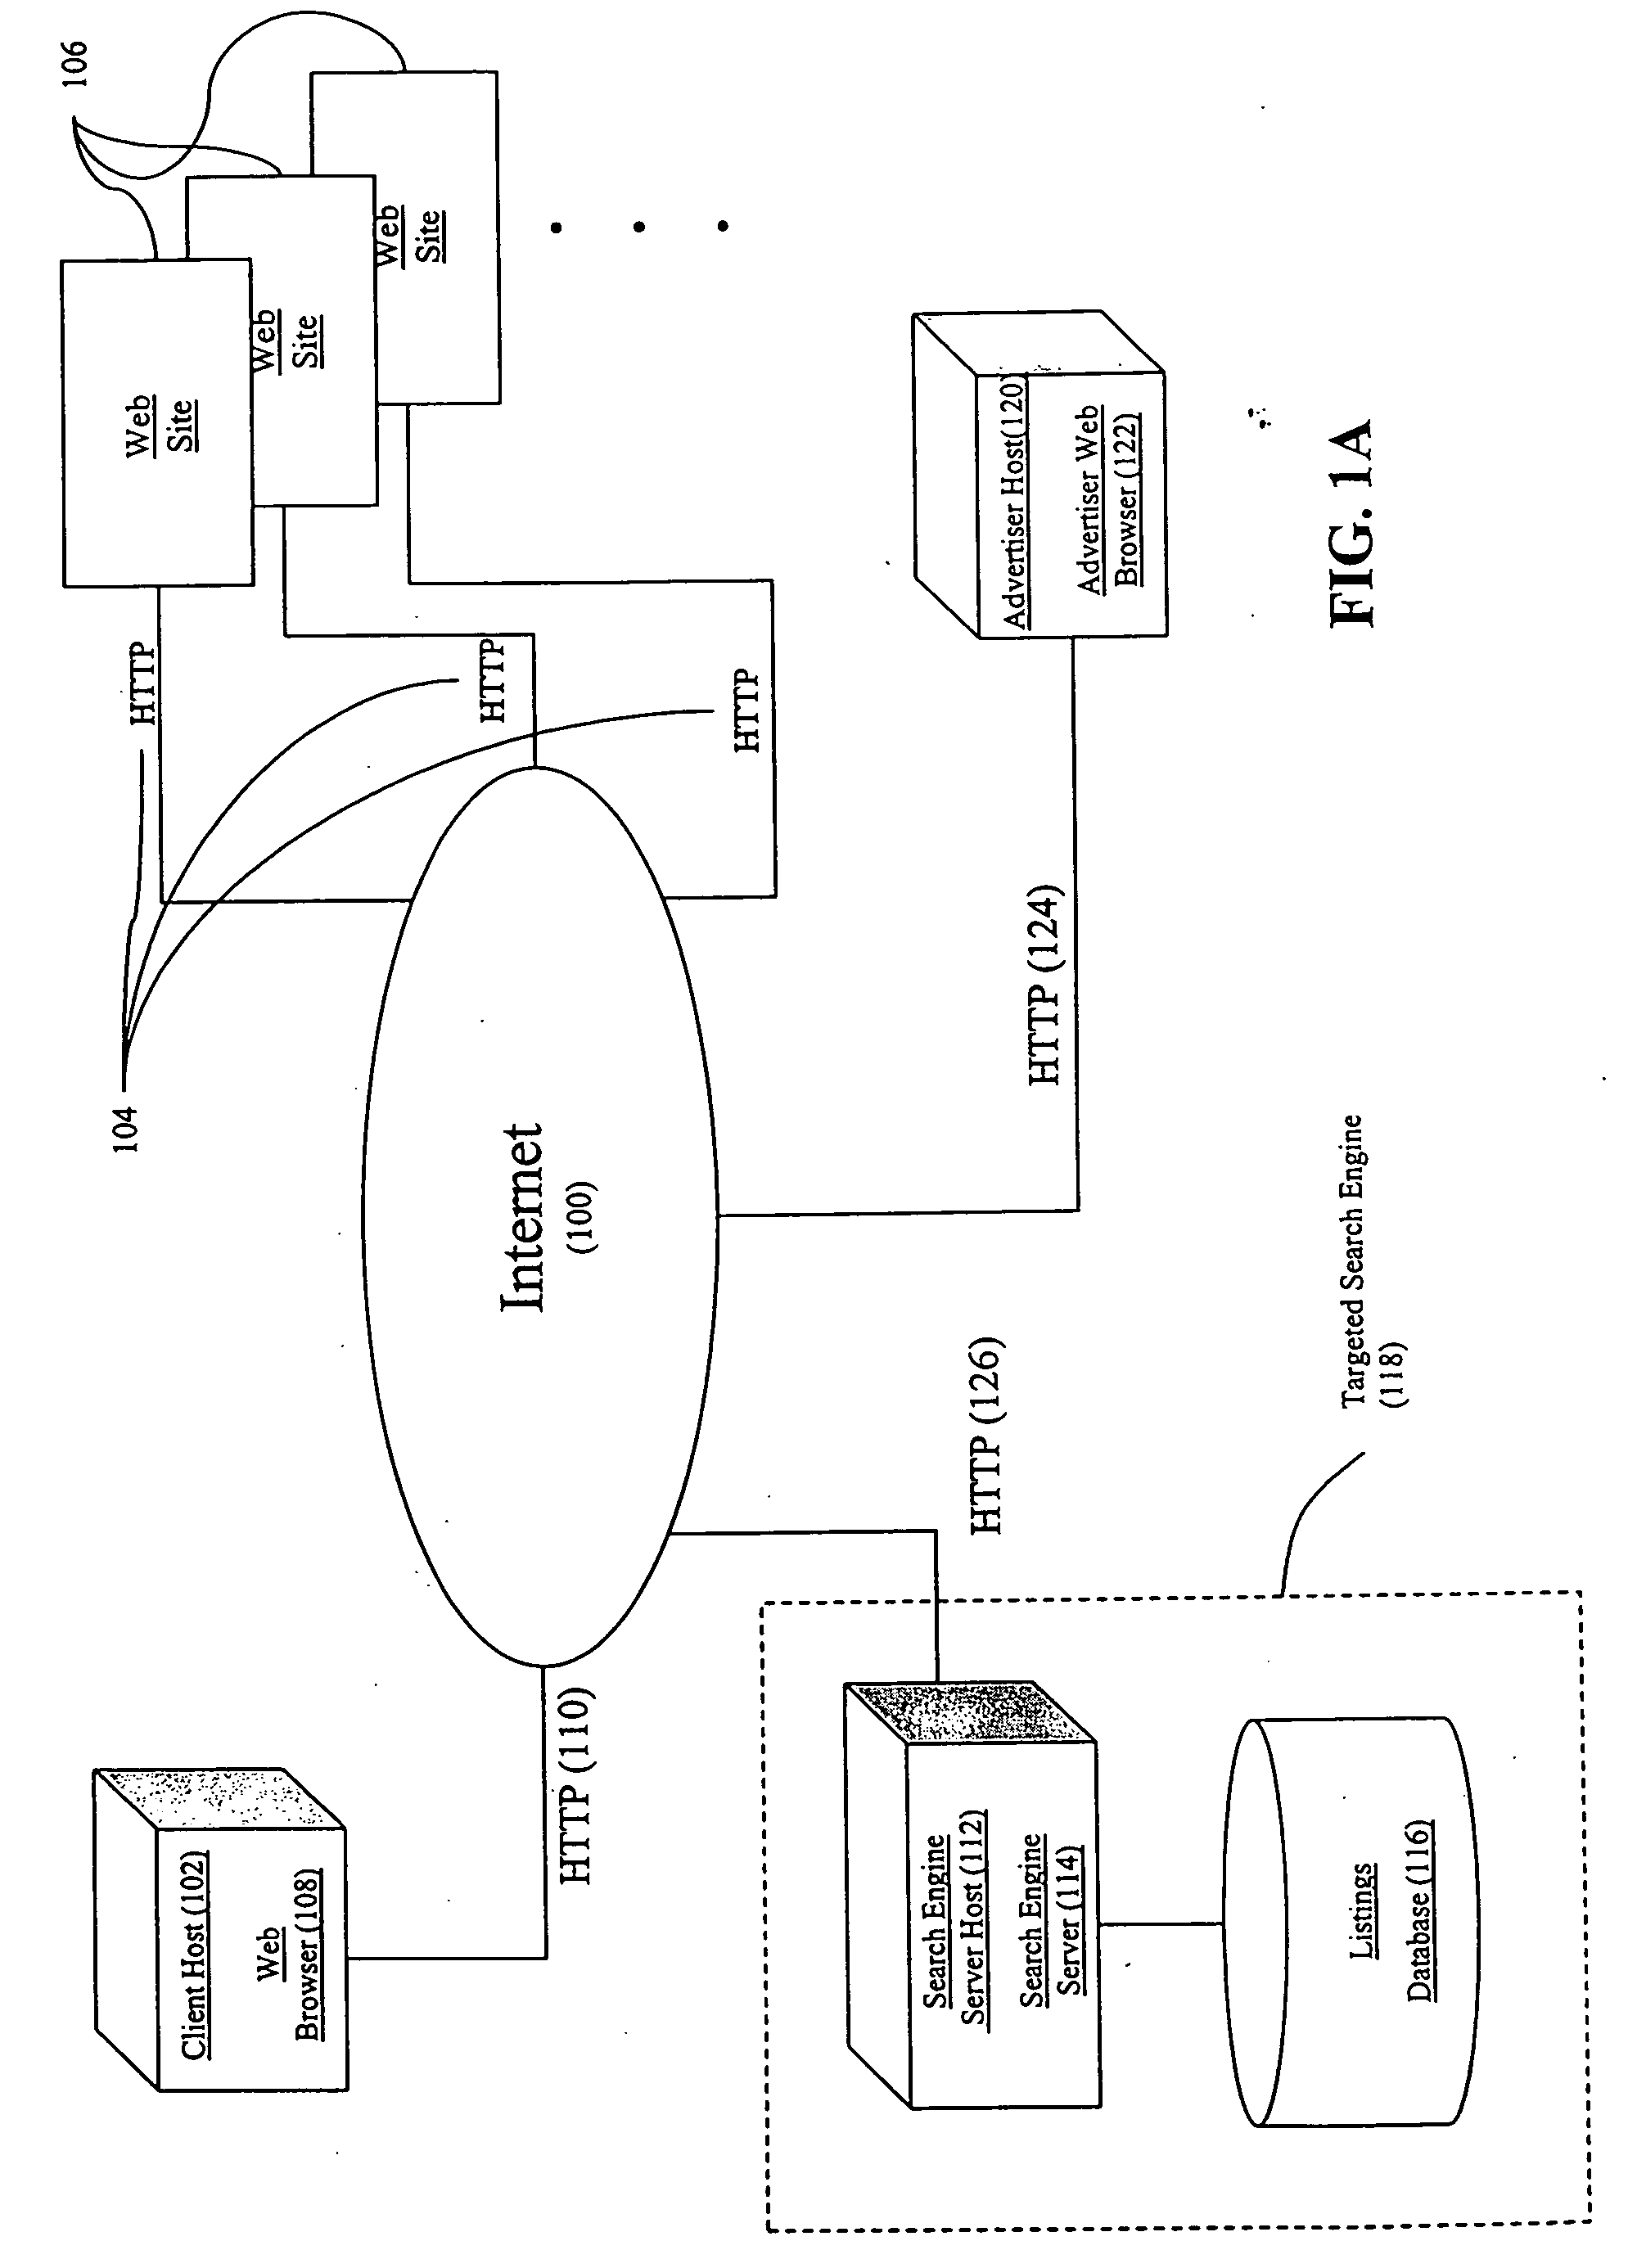 Method and system for targeted internet search engine